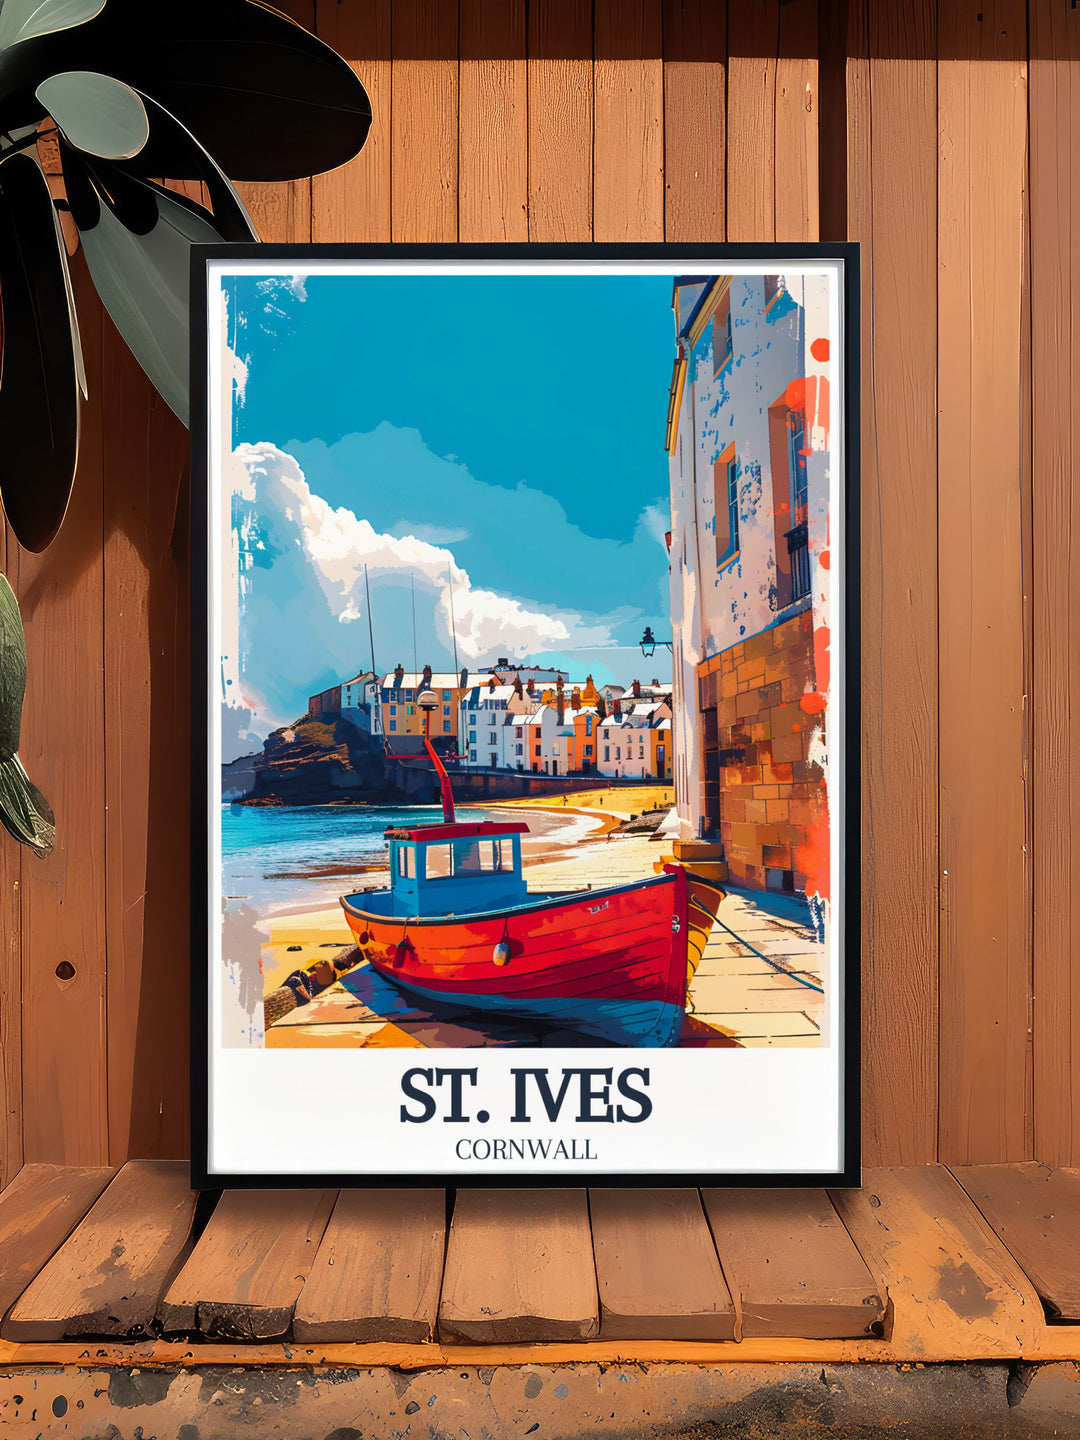 This vintage inspired poster captures the essence of Porthmeor Beachs natural beauty and St. Ives rich cultural heritage, offering a glimpse into Cornwalls scenic coastlines.